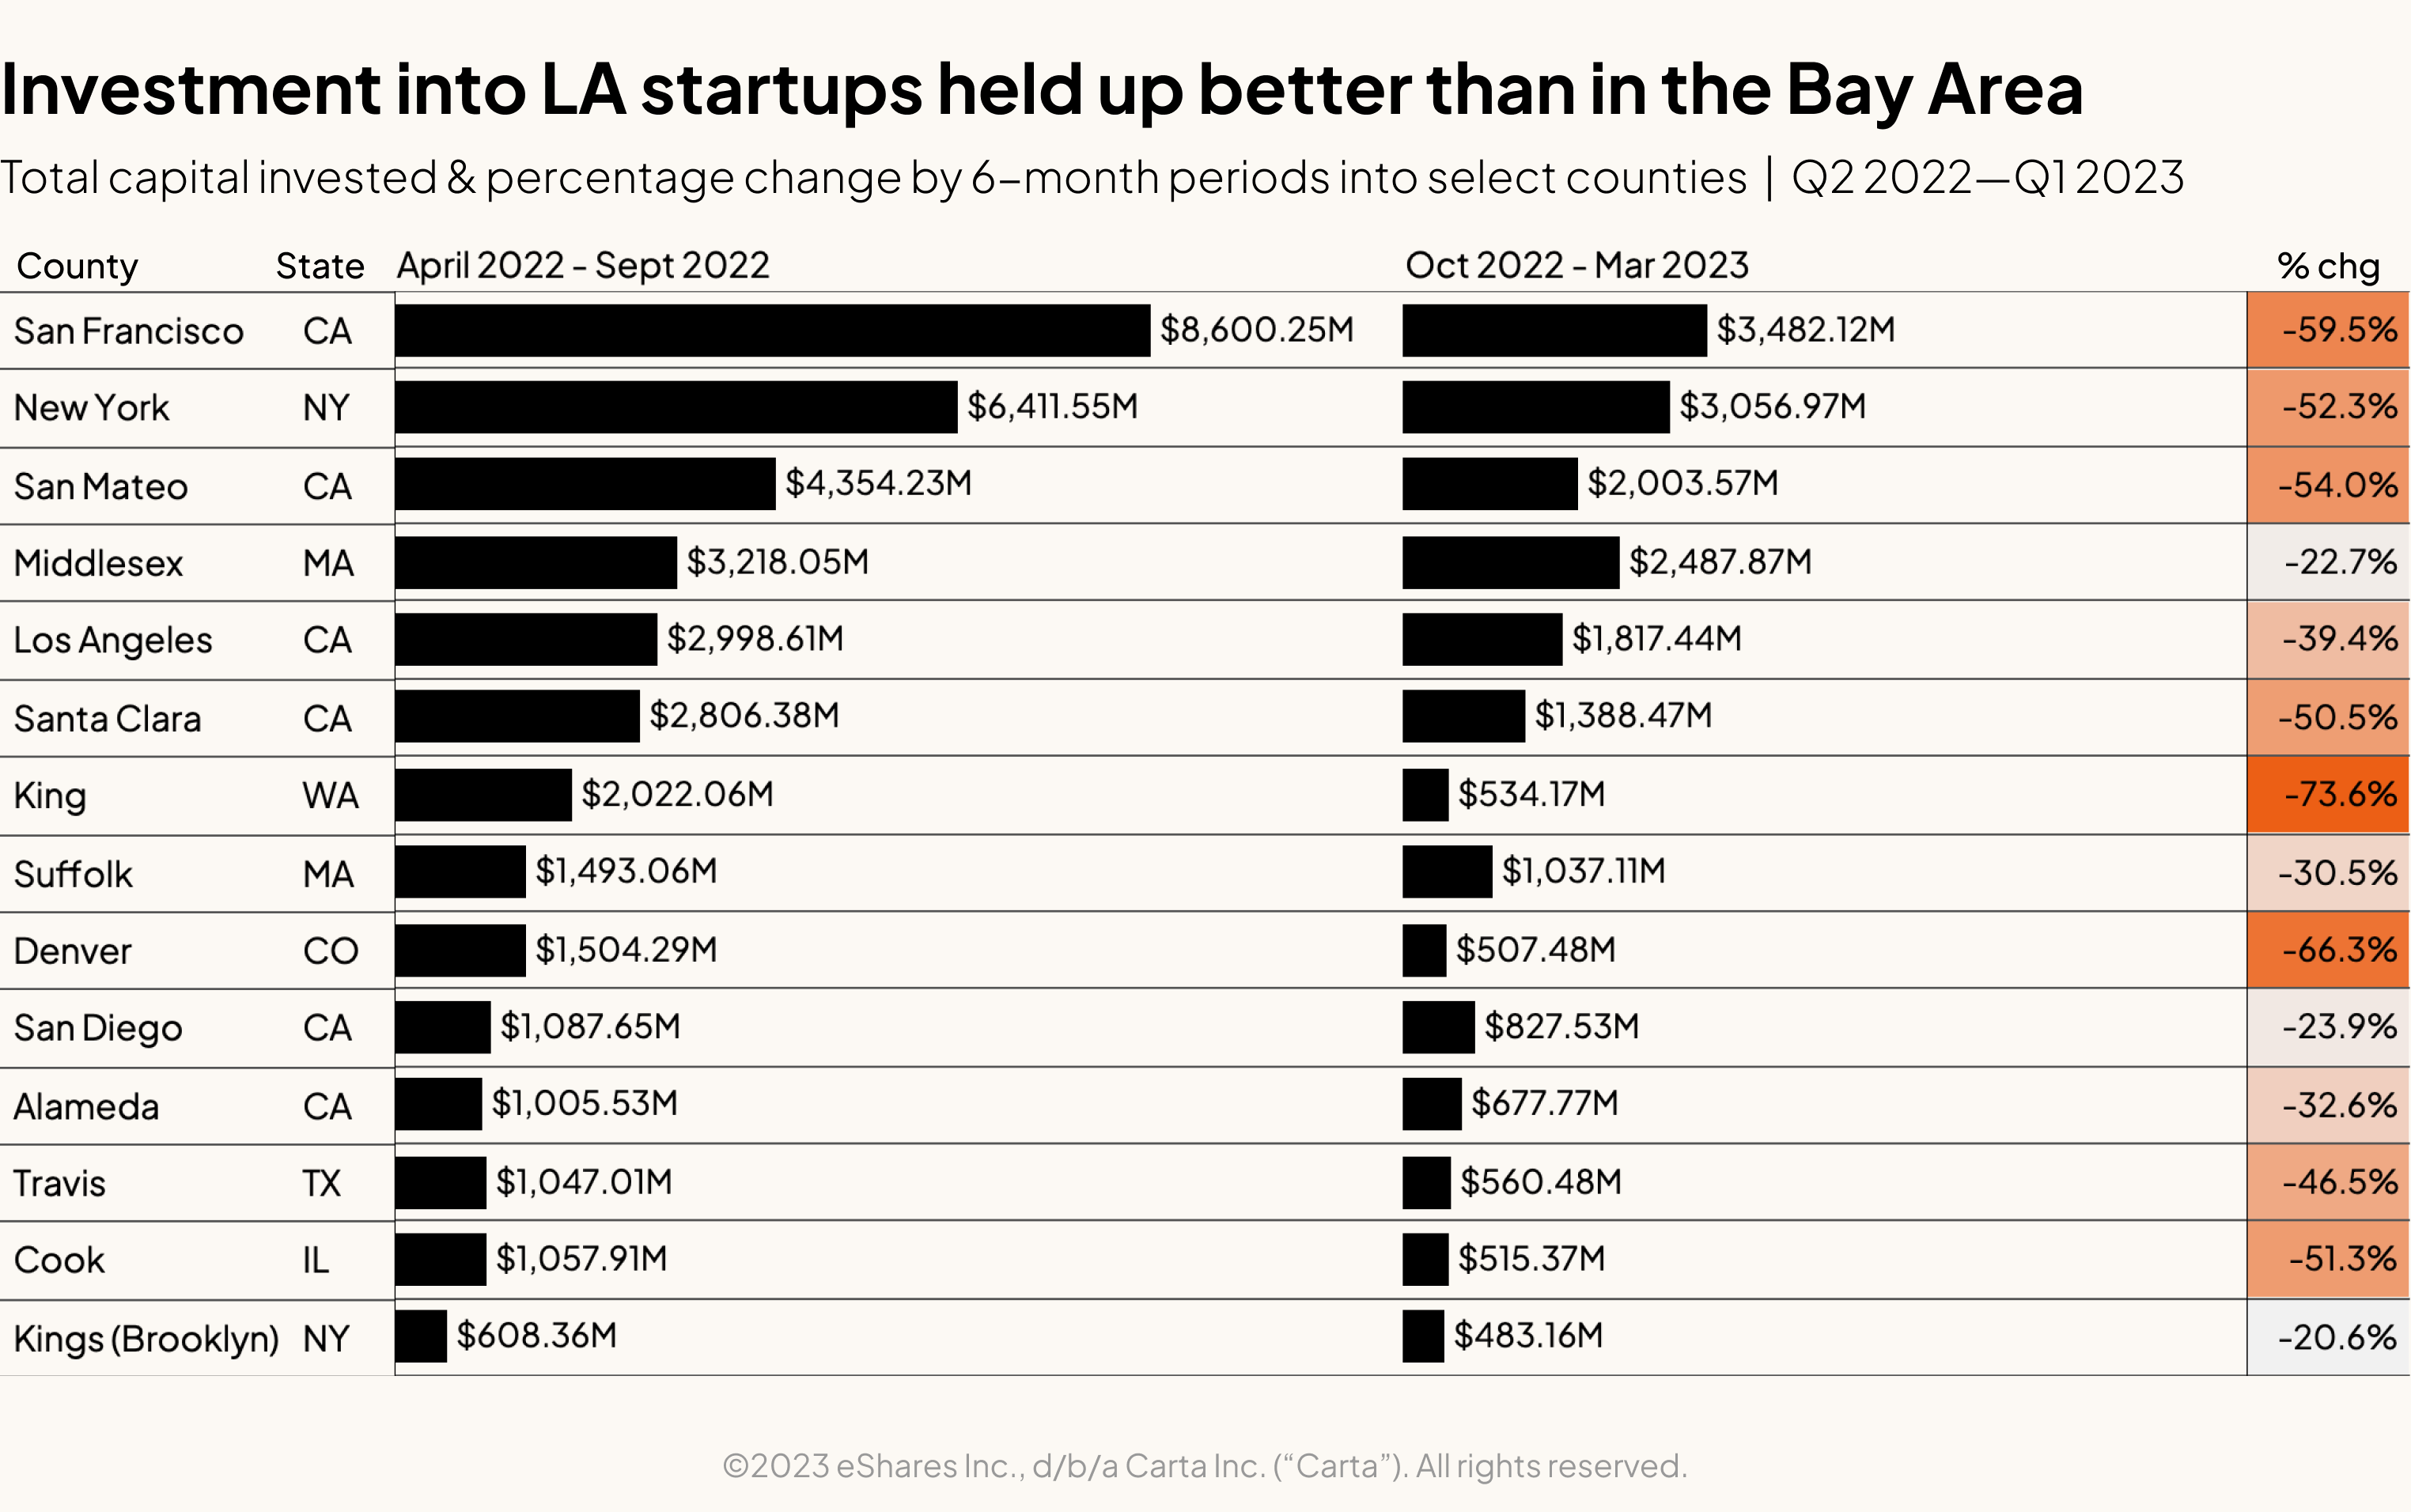 Investment into LA startups held up better than in the Bay Area